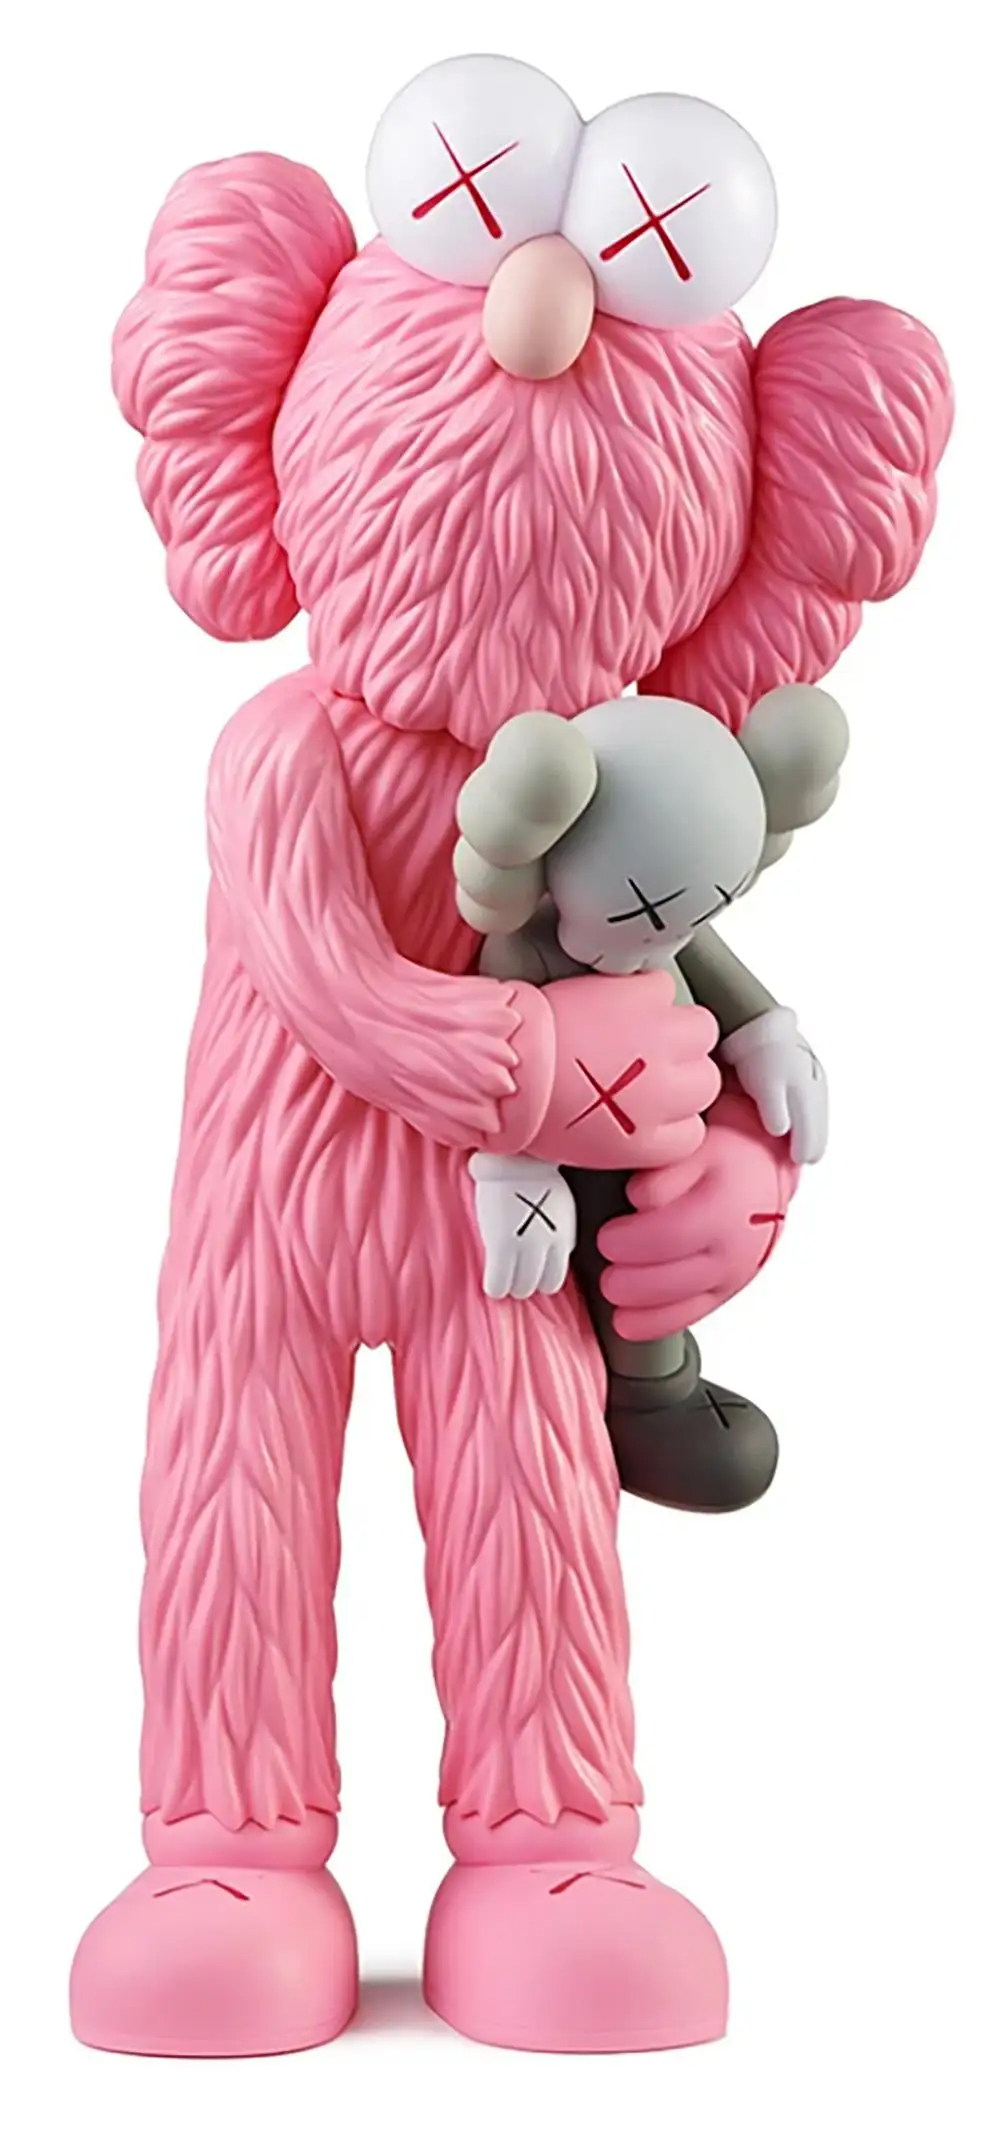 KAWS, Medicom Toy TAKE Pink Available For Immediate Sale At Sotheby's